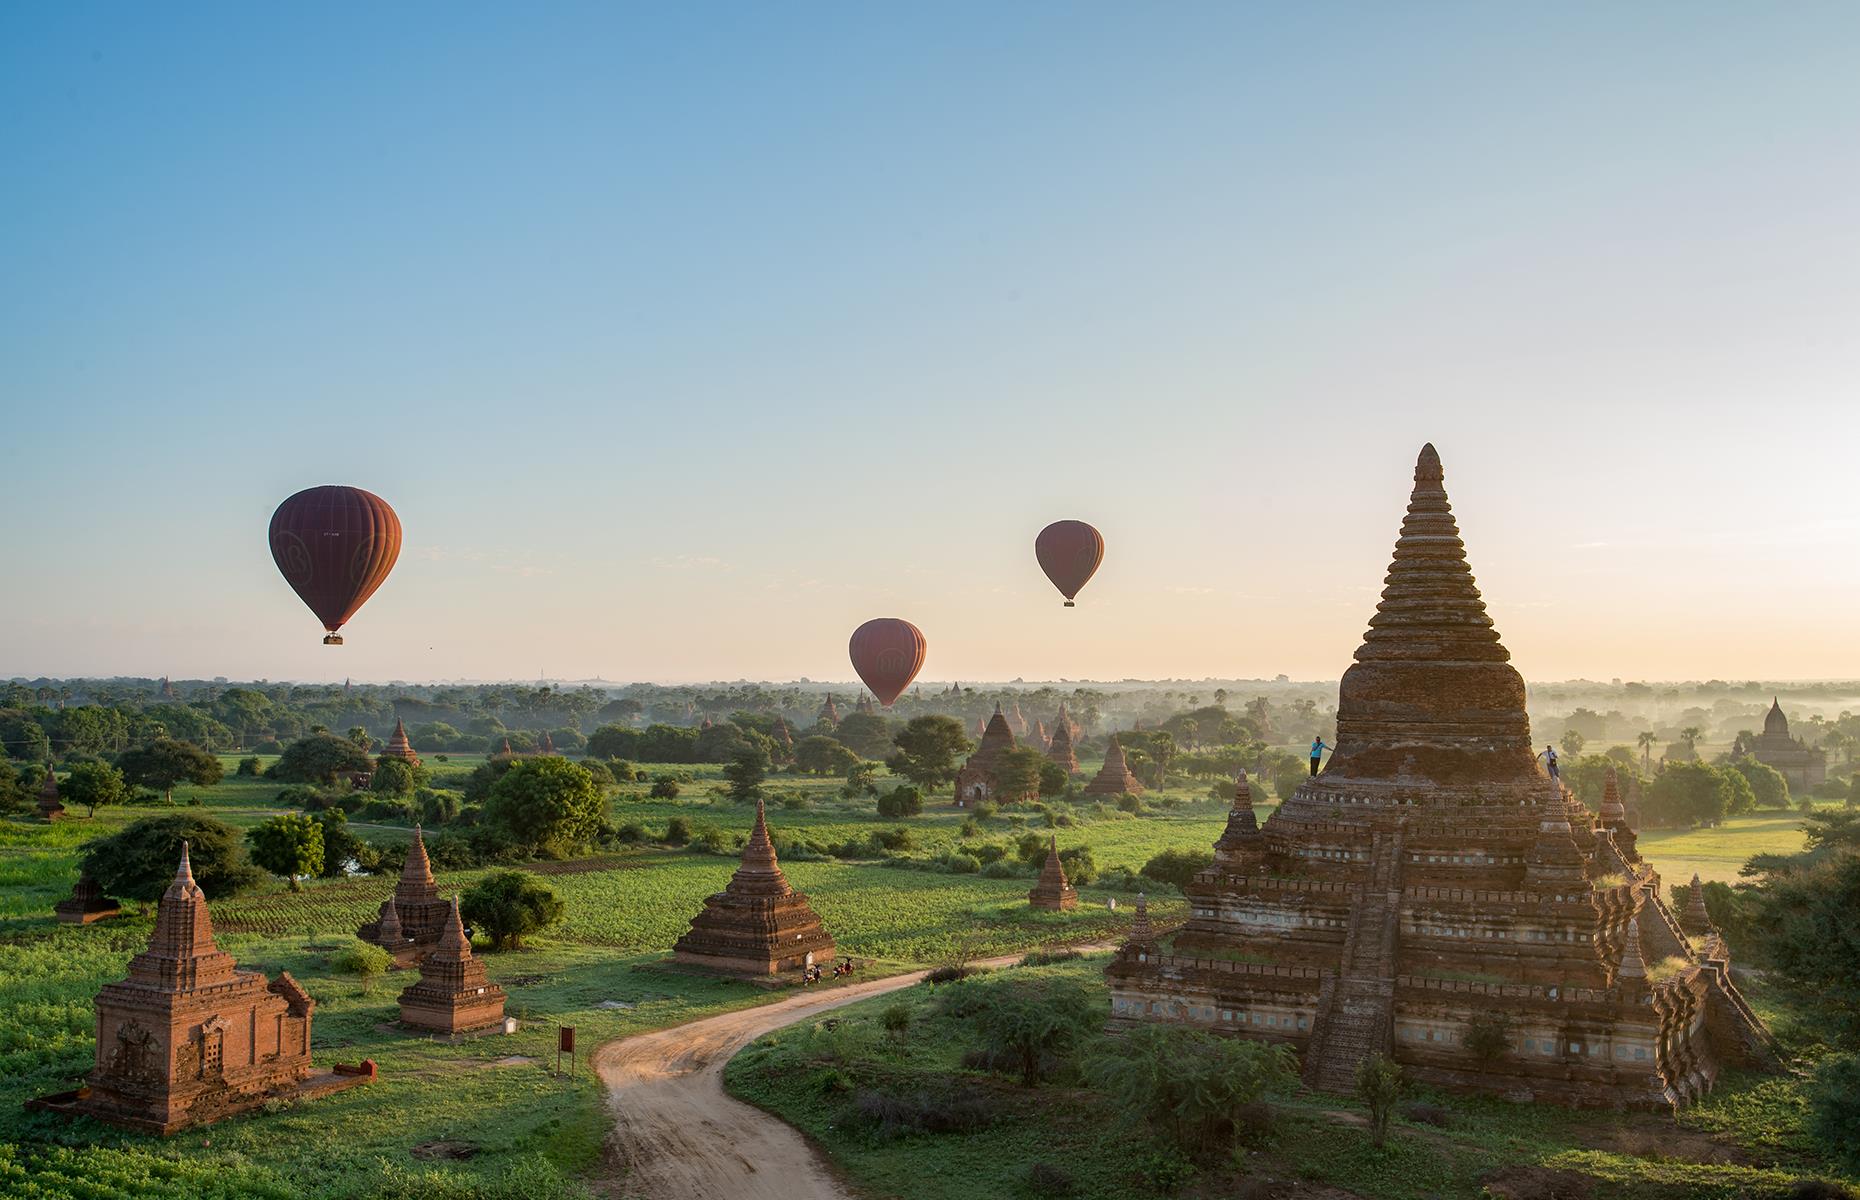 Over 2,000 Buddhist structures dot the plains of Bagan and the sight of hot air balloons rising at dawn to take in the landscape is truly memorable. Join one of those balloons and you'll get a stunning overview of the vast area, where crumbling stupas and monasteries, many of them around a thousand years old, stand tall amid lush green scenery. It's just as evocative on the ground too, so once you've seen it all from above, walk among the ruins to see the Bagan of old up close.